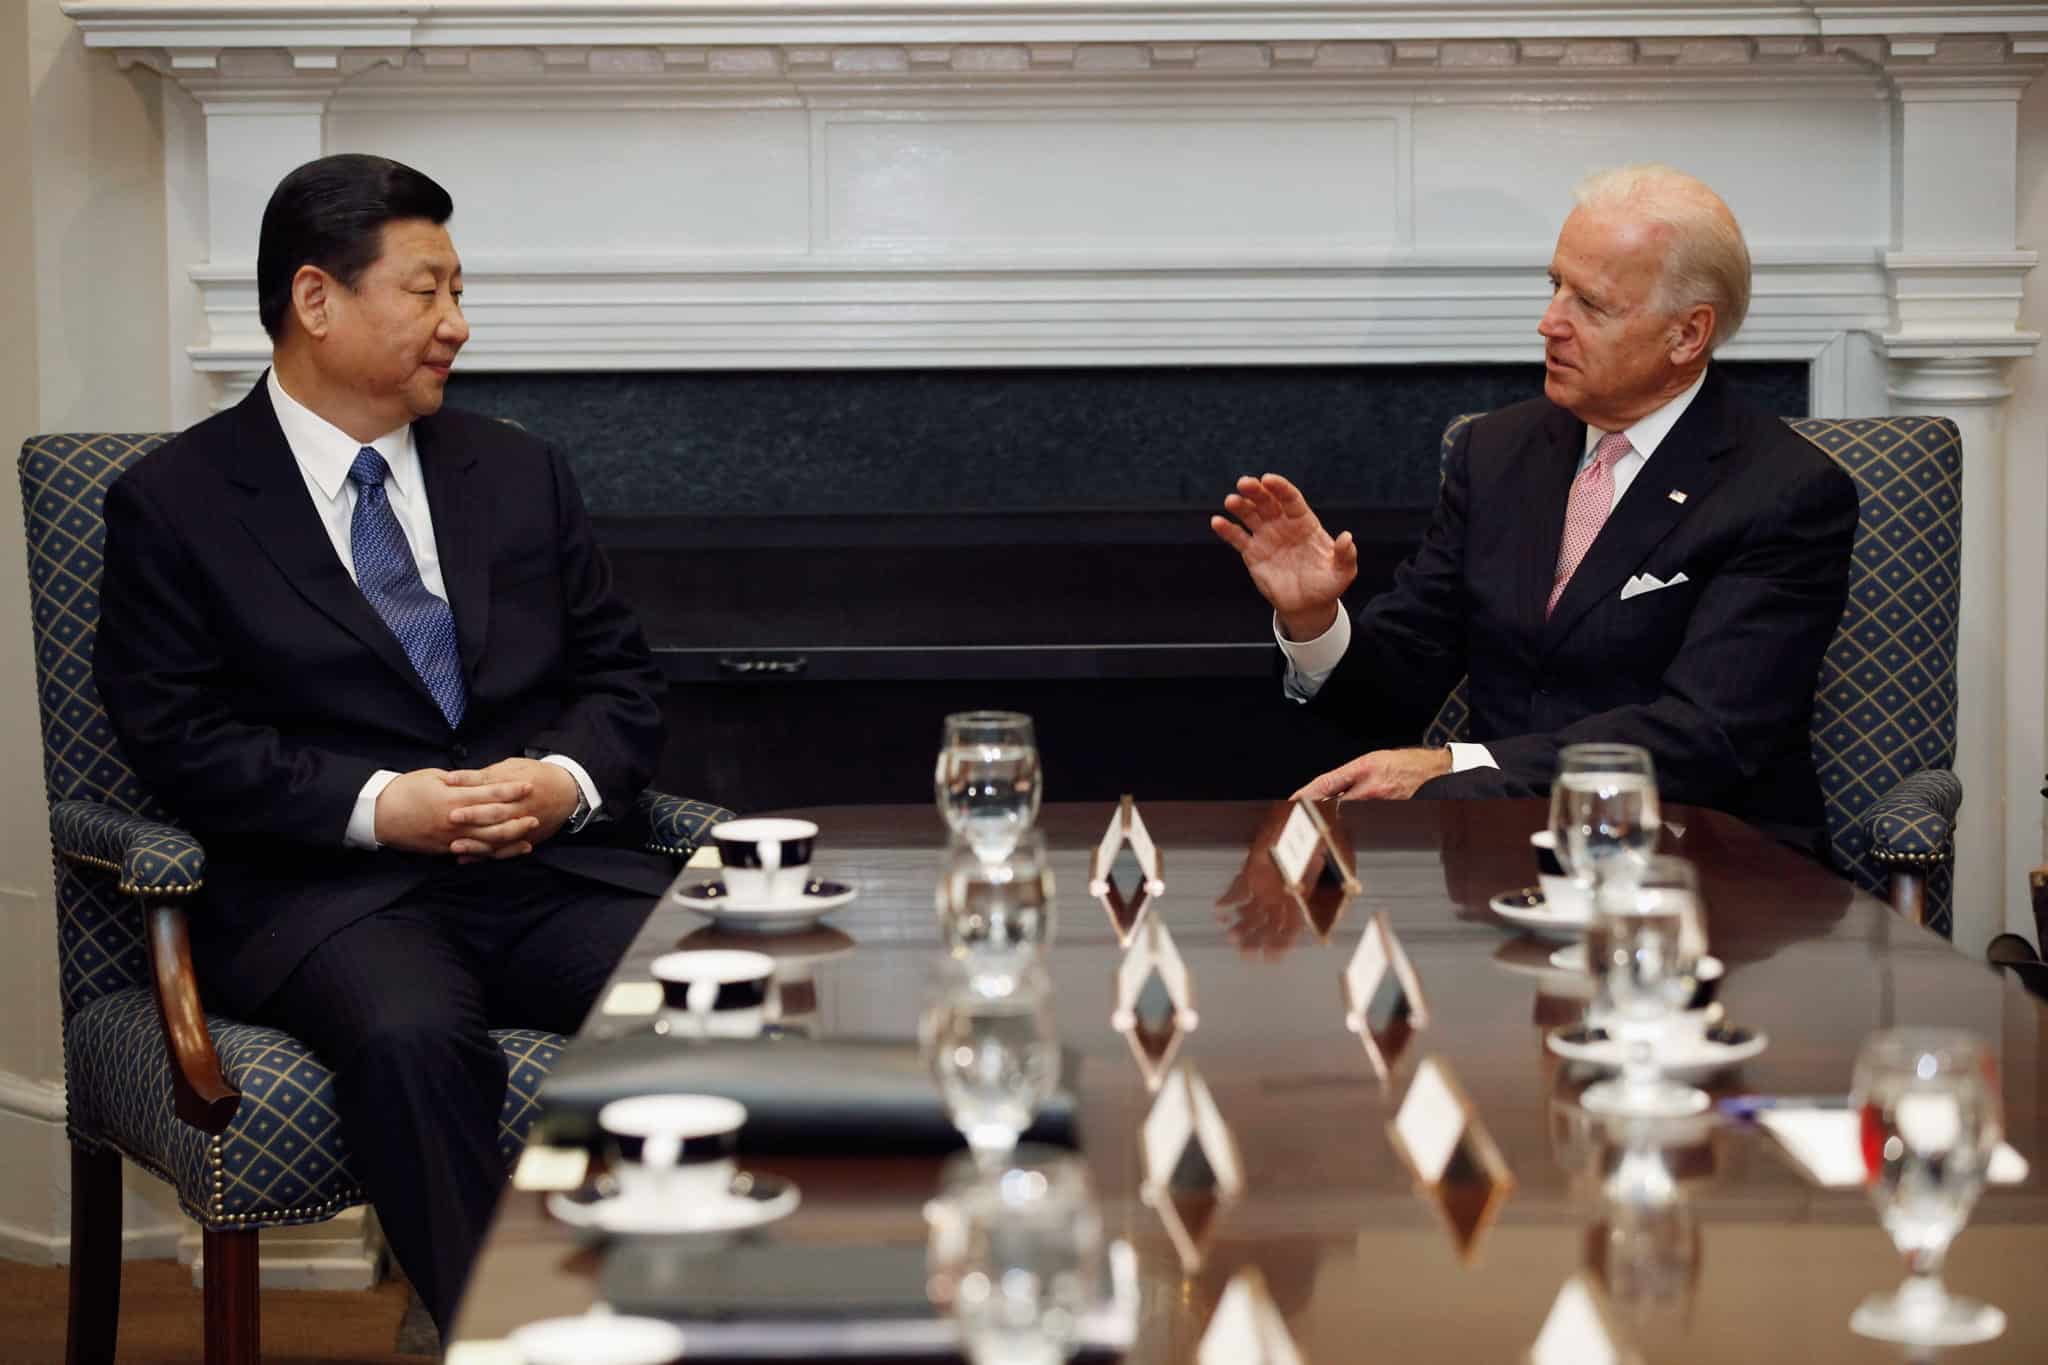 As Biden and Xi gear up for a high-stakes meeting, experts have low expectations